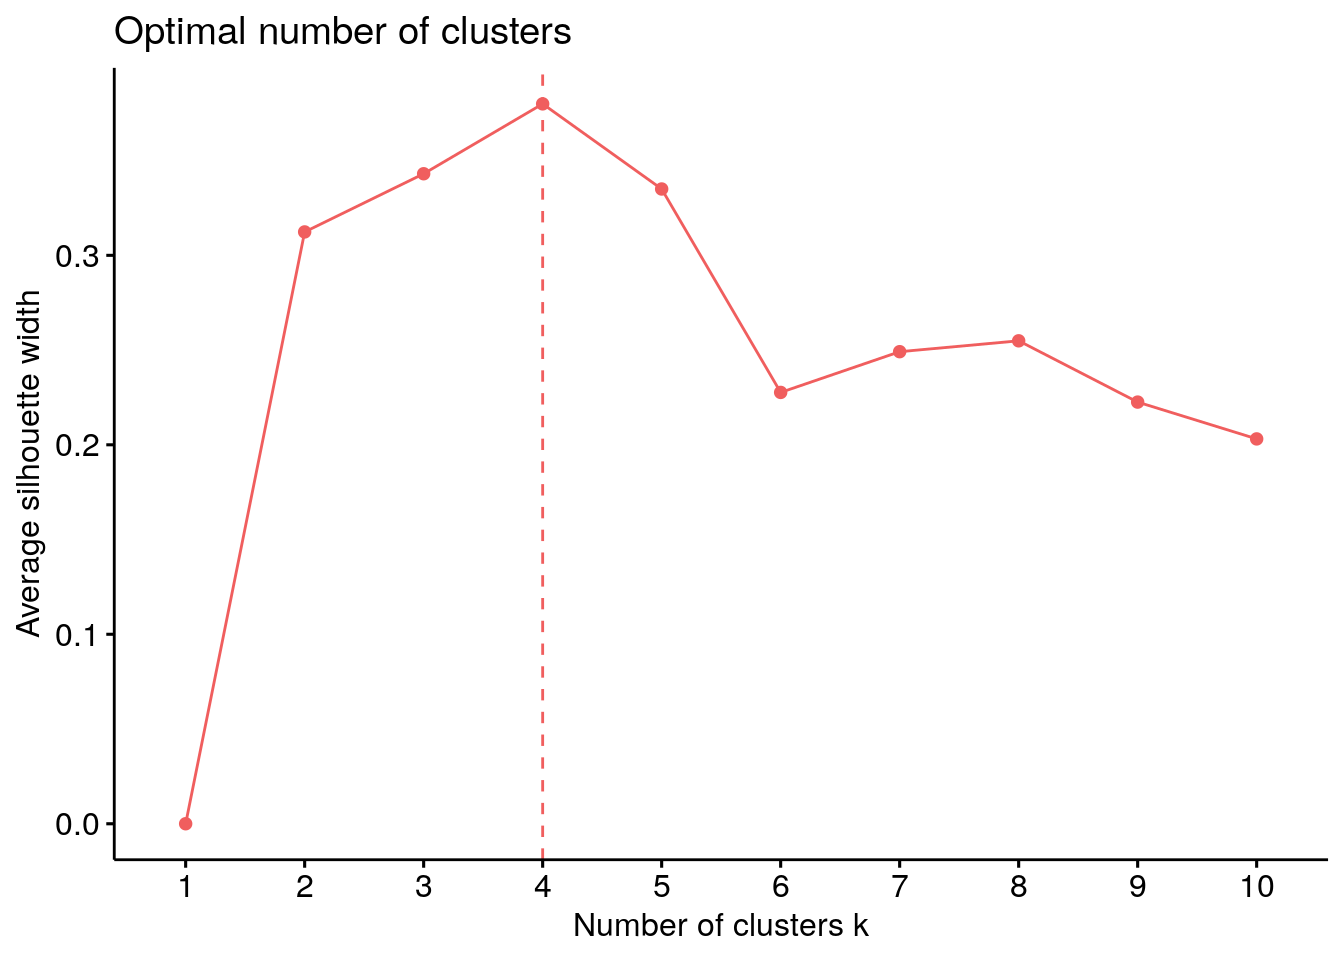 Optimal number of clusters using silhouette appraoch.